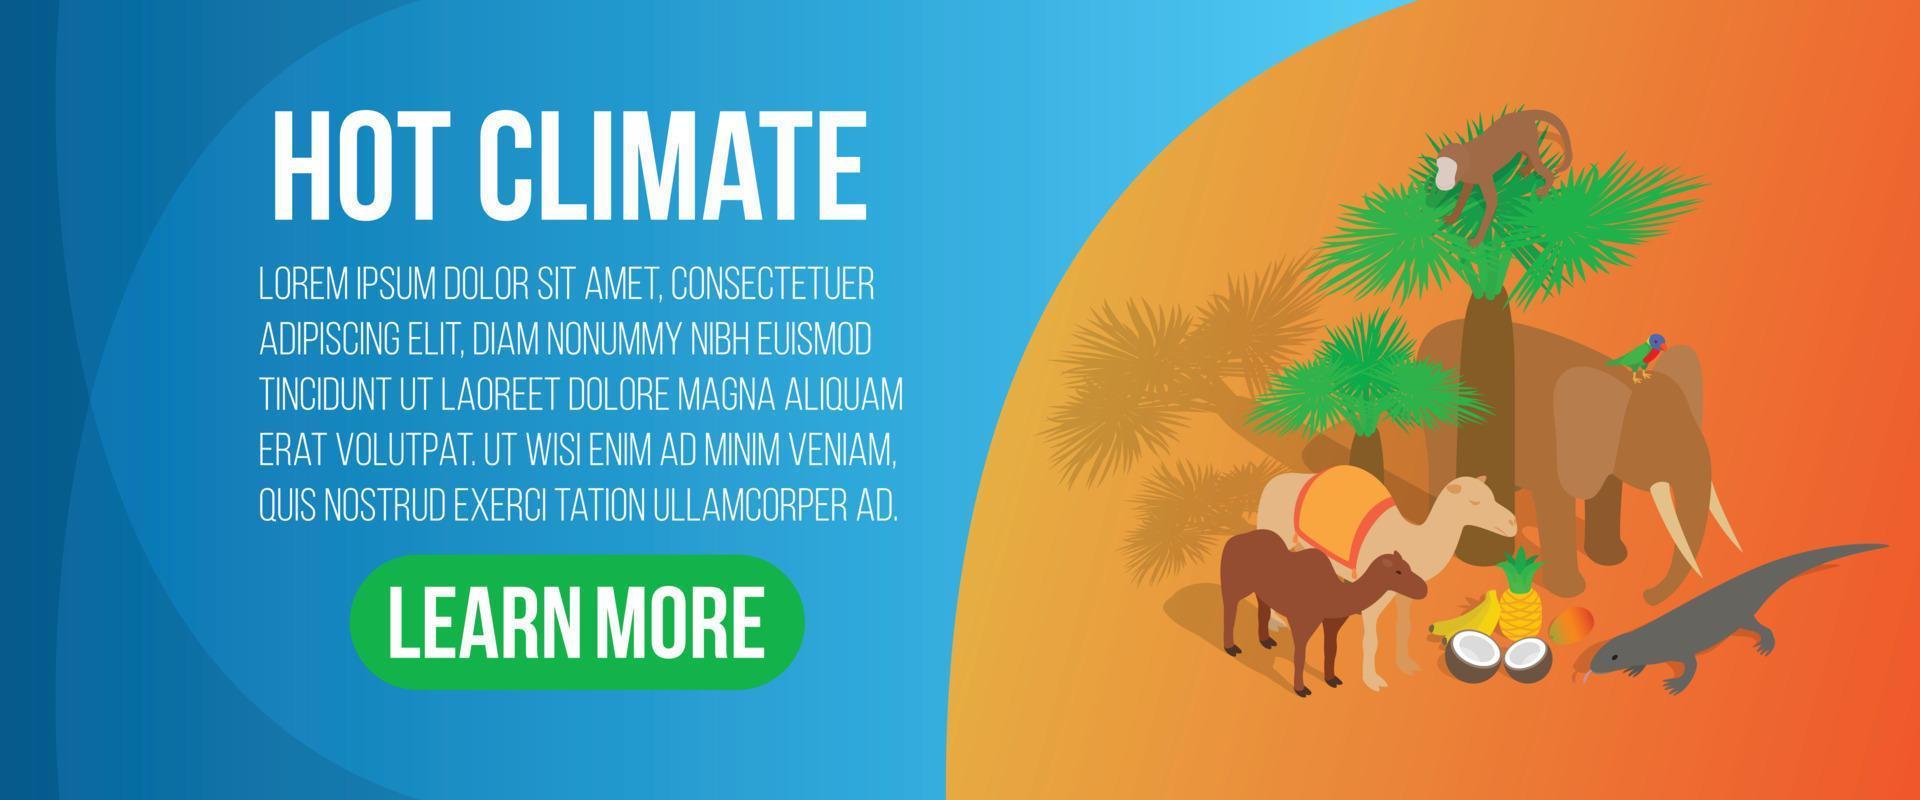 Hot climate concept banner, isometric style vector